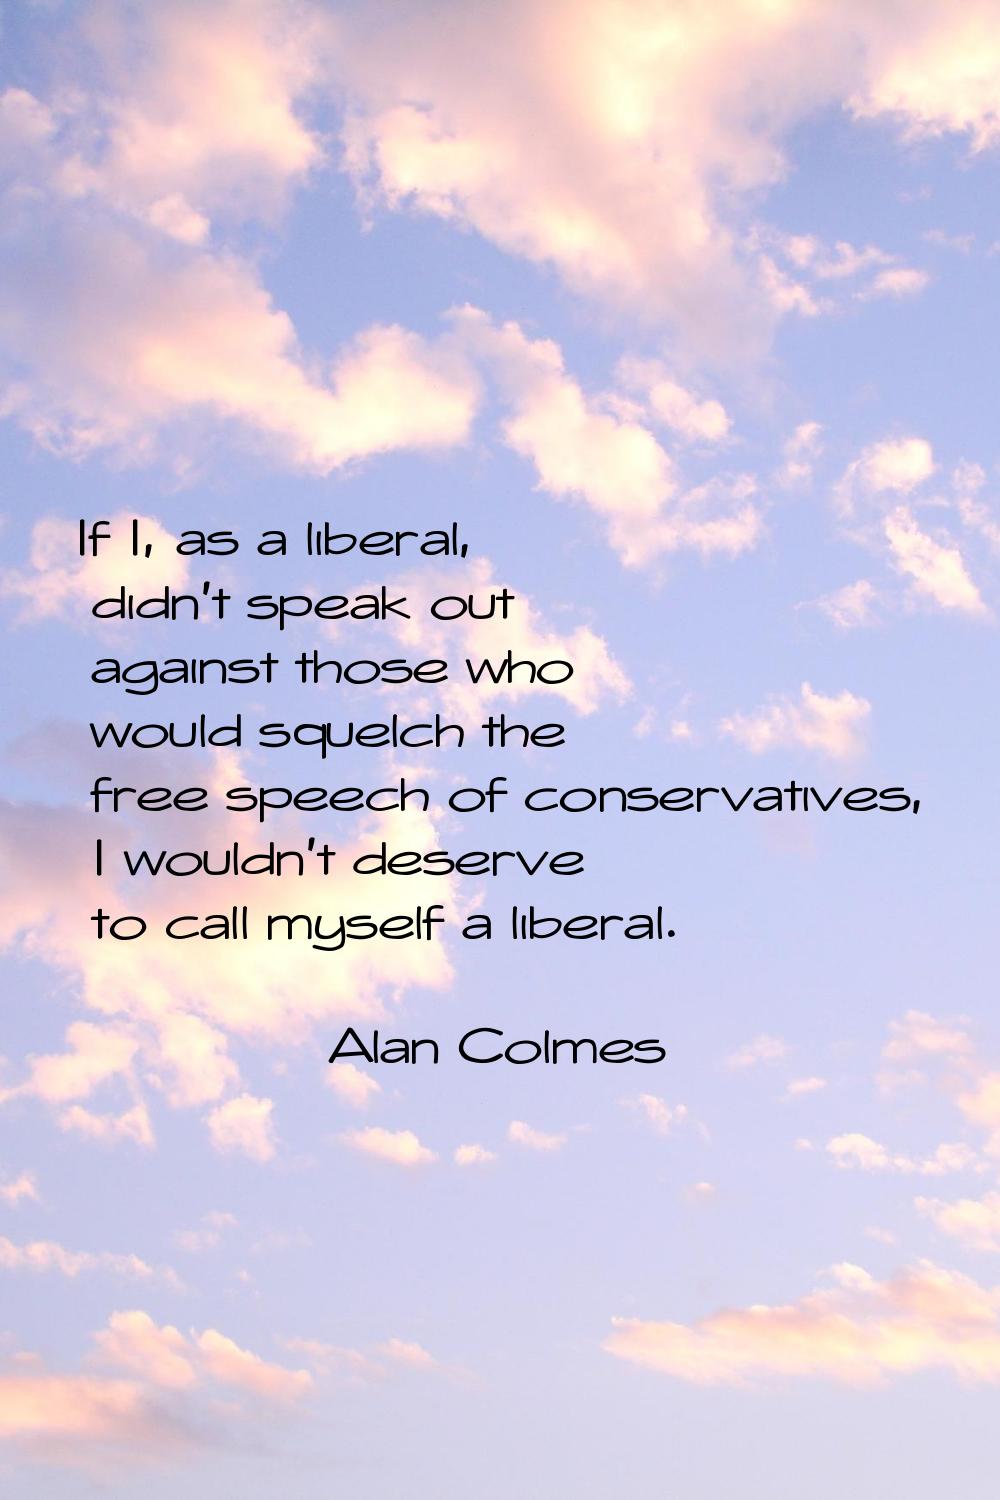 If I, as a liberal, didn't speak out against those who would squelch the free speech of conservativ